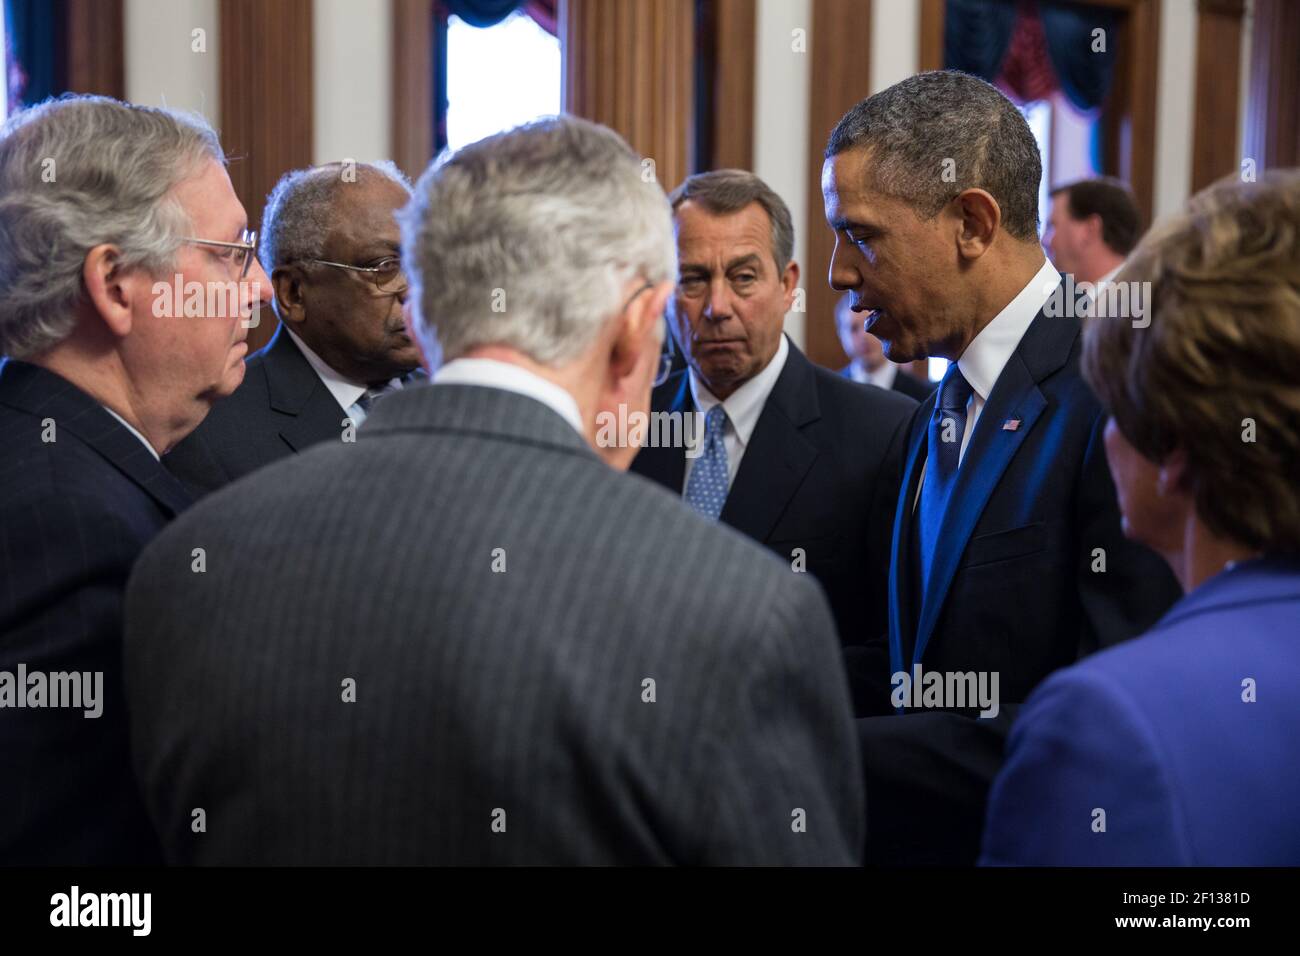 President Barack Obama talks with Congressional leaders prior to the Rosa Parks statue unveiling ceremony at the U.S. Capitol in Washington D.C. Feb. 27 2013. Pictured from left are: Minority Leader Sen. Mitch McConnell R-Ky.; Rep. James Clyburn D-S.C.; Majority Leader Sen. Harry Reid D-Nev.; House Speaker John Boehner R-Ohio; and House Minority Leader Rep. Nancy Pelosi D-Calif. Stock Photo